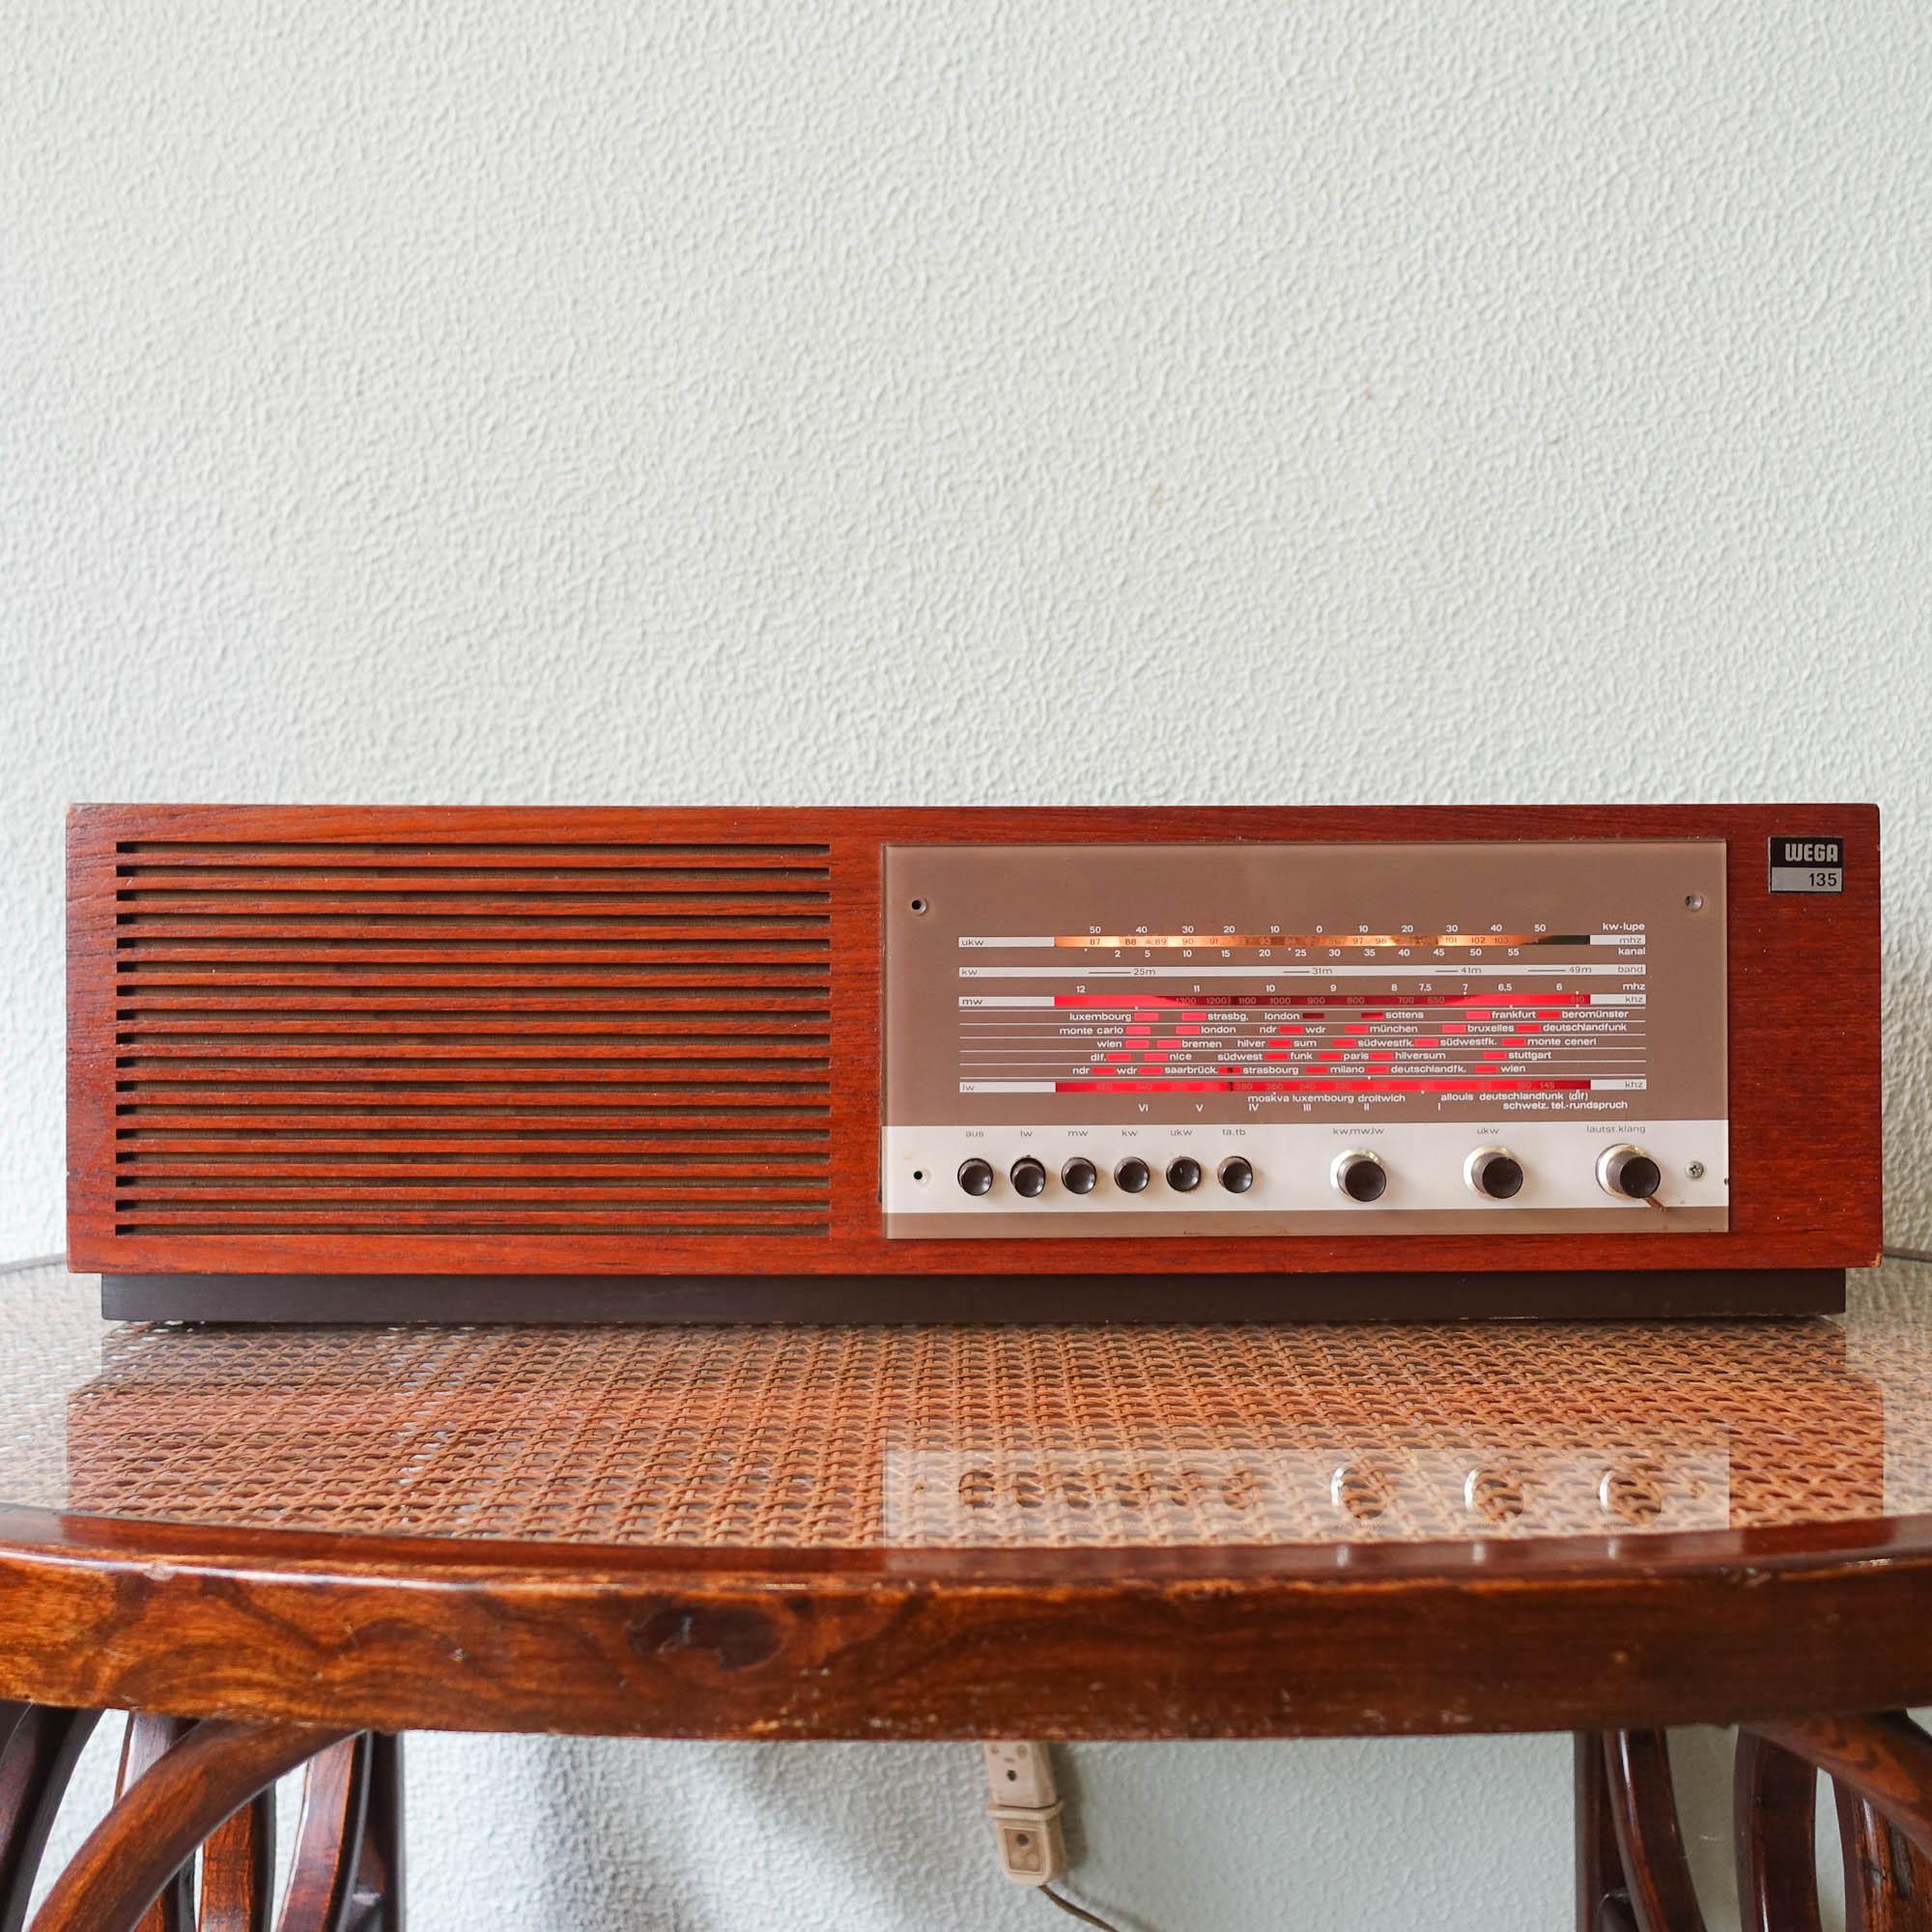 This radio, type 135, was made by Wega in West-Germany, during the 1960's. With a teak wooden case, it has broadcast, long wave, short wave plus FM or UHF. Good sensitive reception on FM and a good sound quality. In original and good working